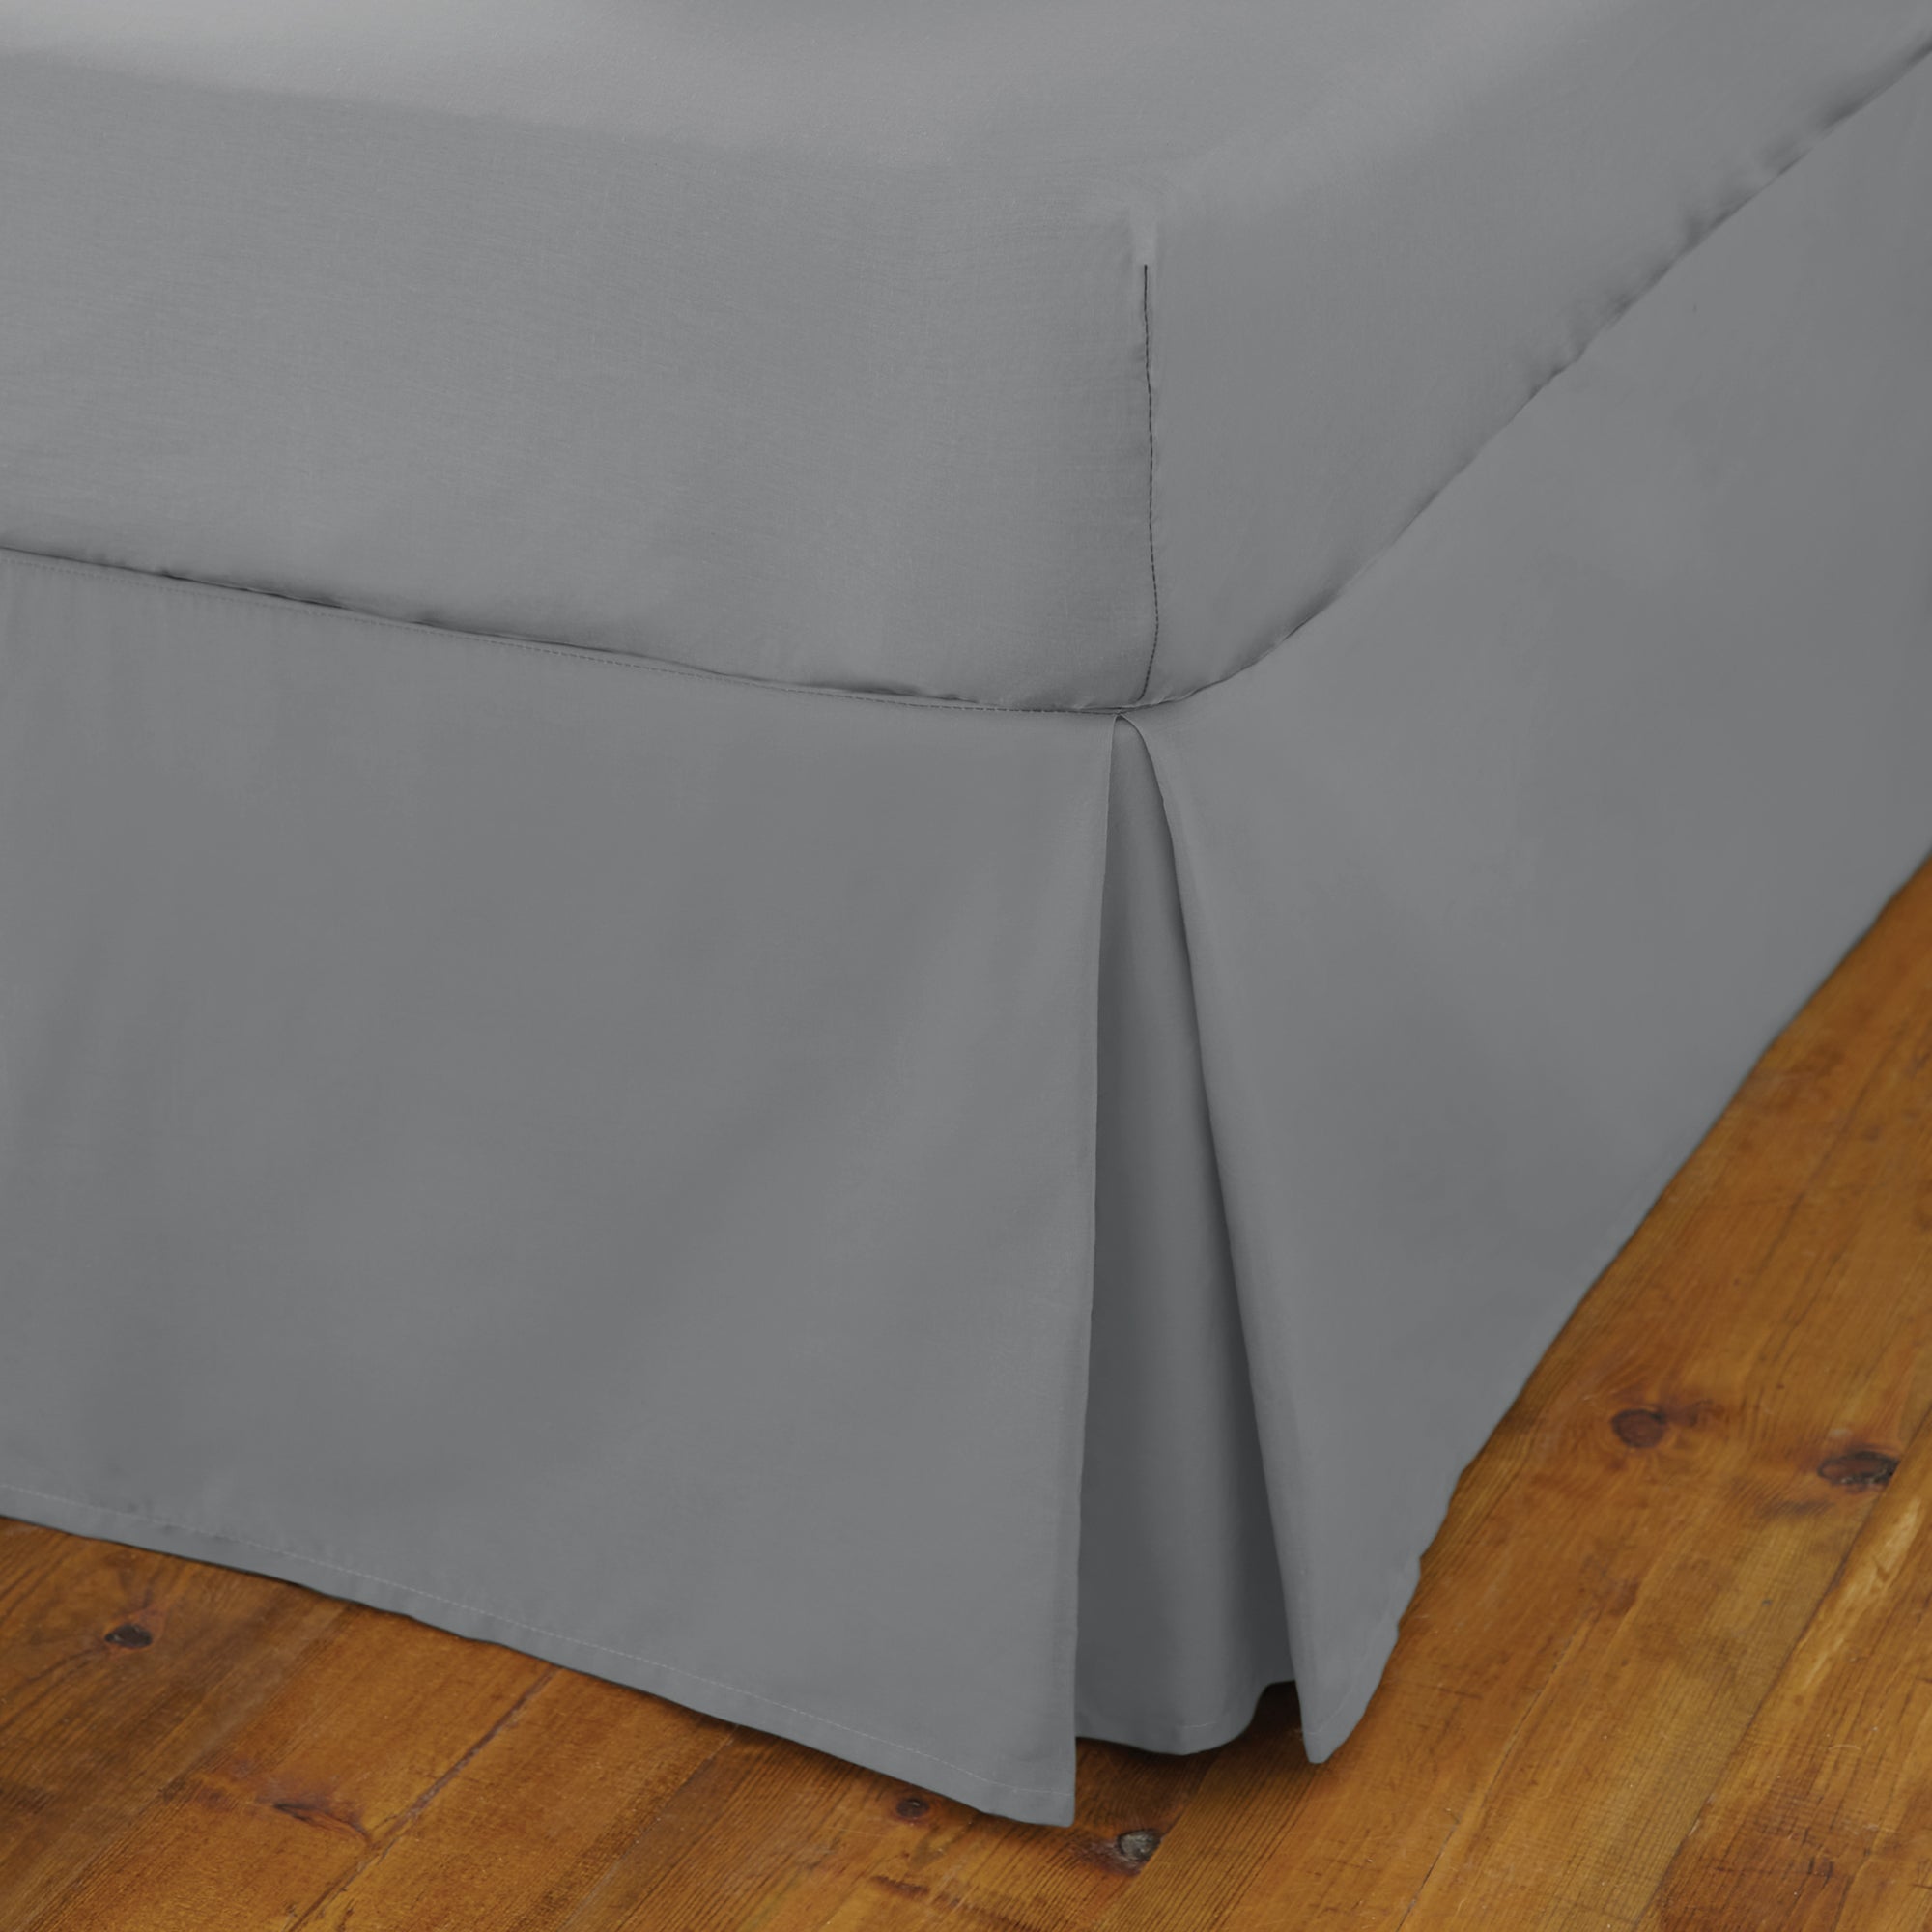 Fogarty Cooling Cotton Fitted Sheet